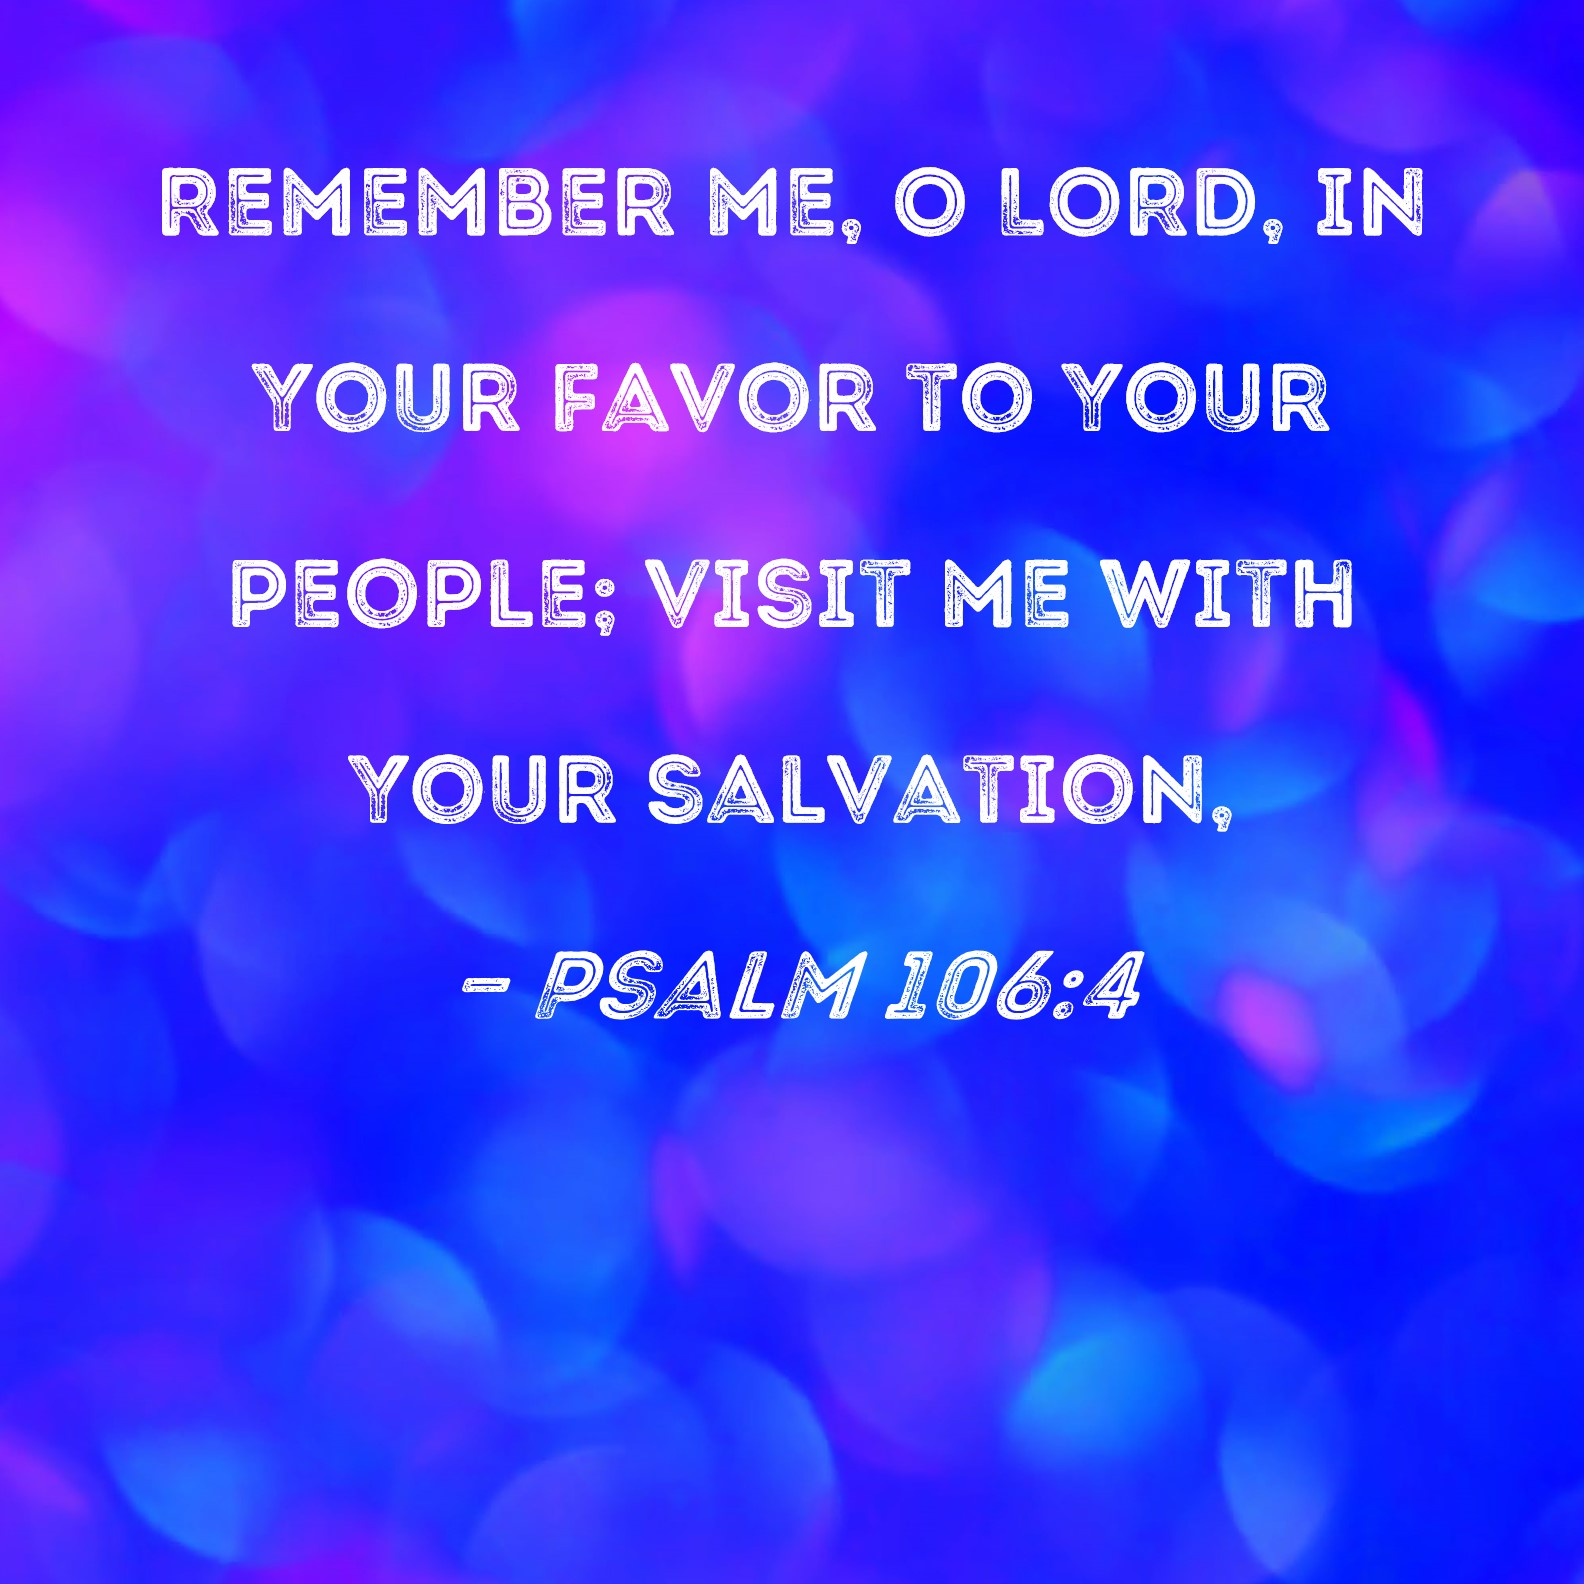 Psalm 1064 Remember Me O Lord In Your Favor To Your People Visit Me